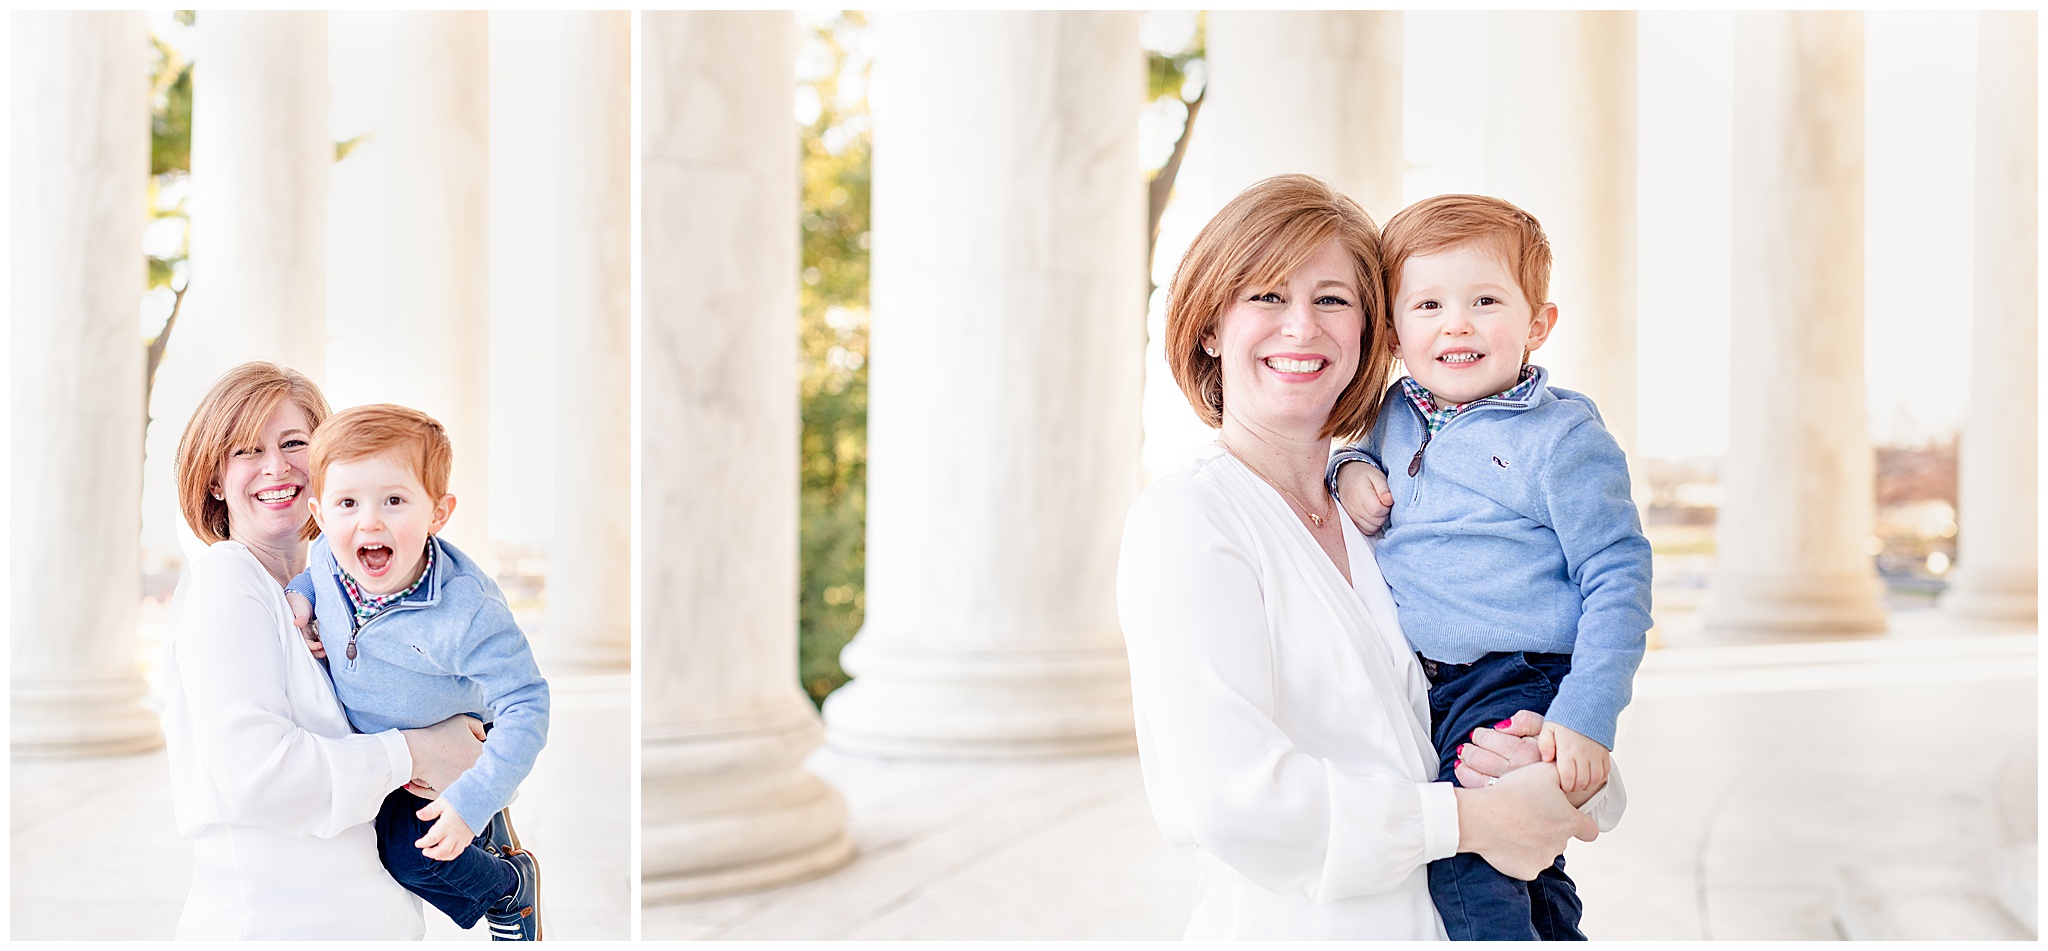 Mom and Son at Family Photo Session at the Jefferson Memorial by Photographer Bethany M. Brasfield Kofmehl